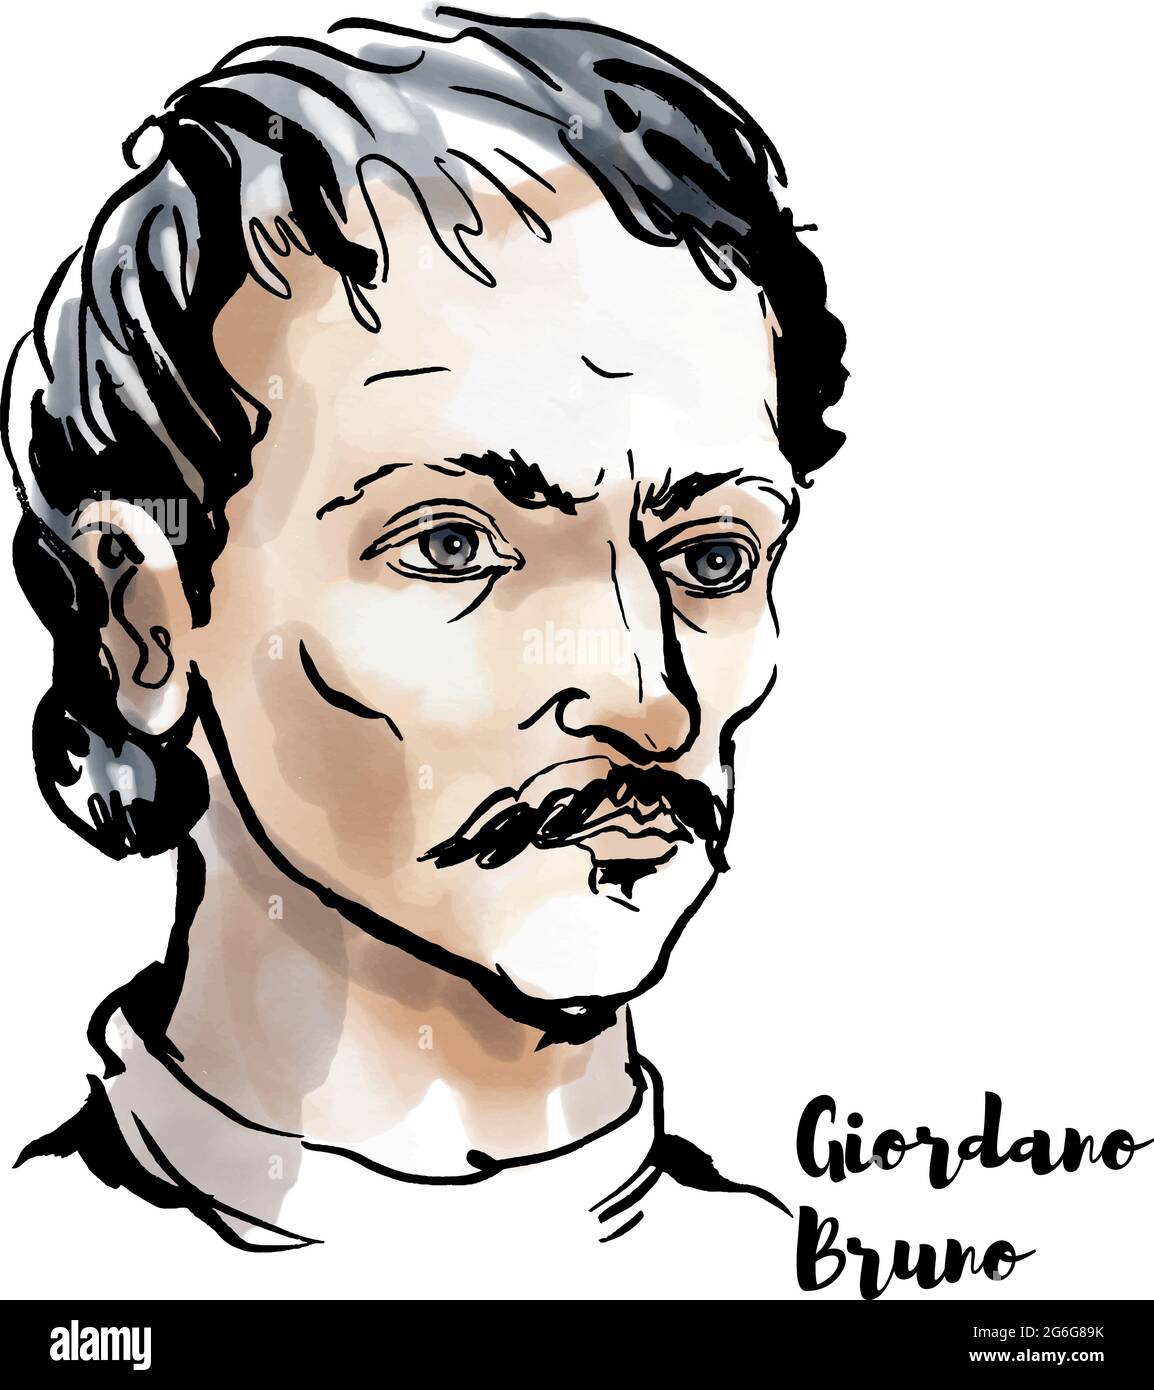 Giordano Bruno watercolor vector portrait with ink contours. Italian Dominican friar, philosopher, mathematician, poet, and cosmological theorist. Stock Vector